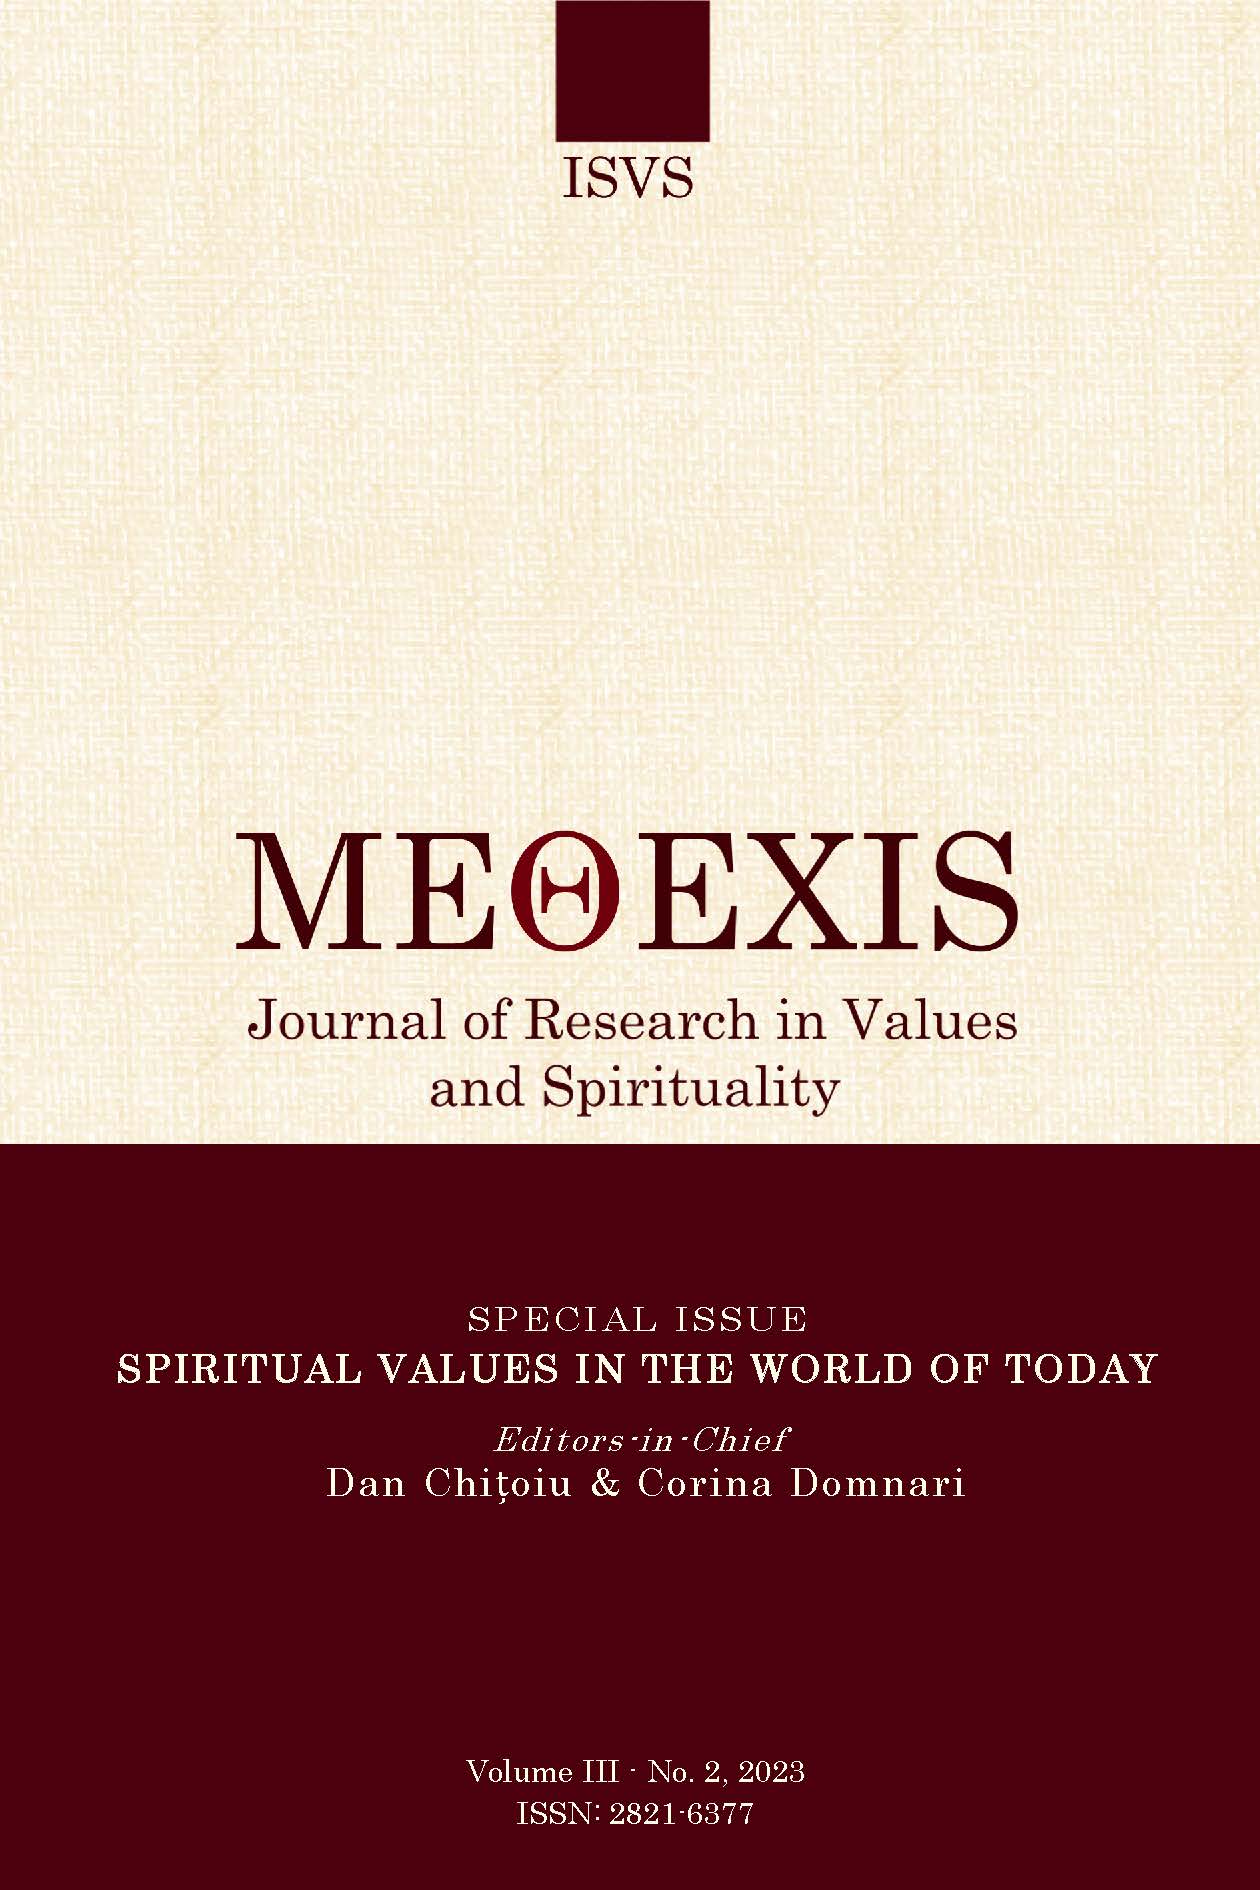 A Philosophical Exploration of Spiritual Values and their Contribution to Shaping Humanity Cover Image